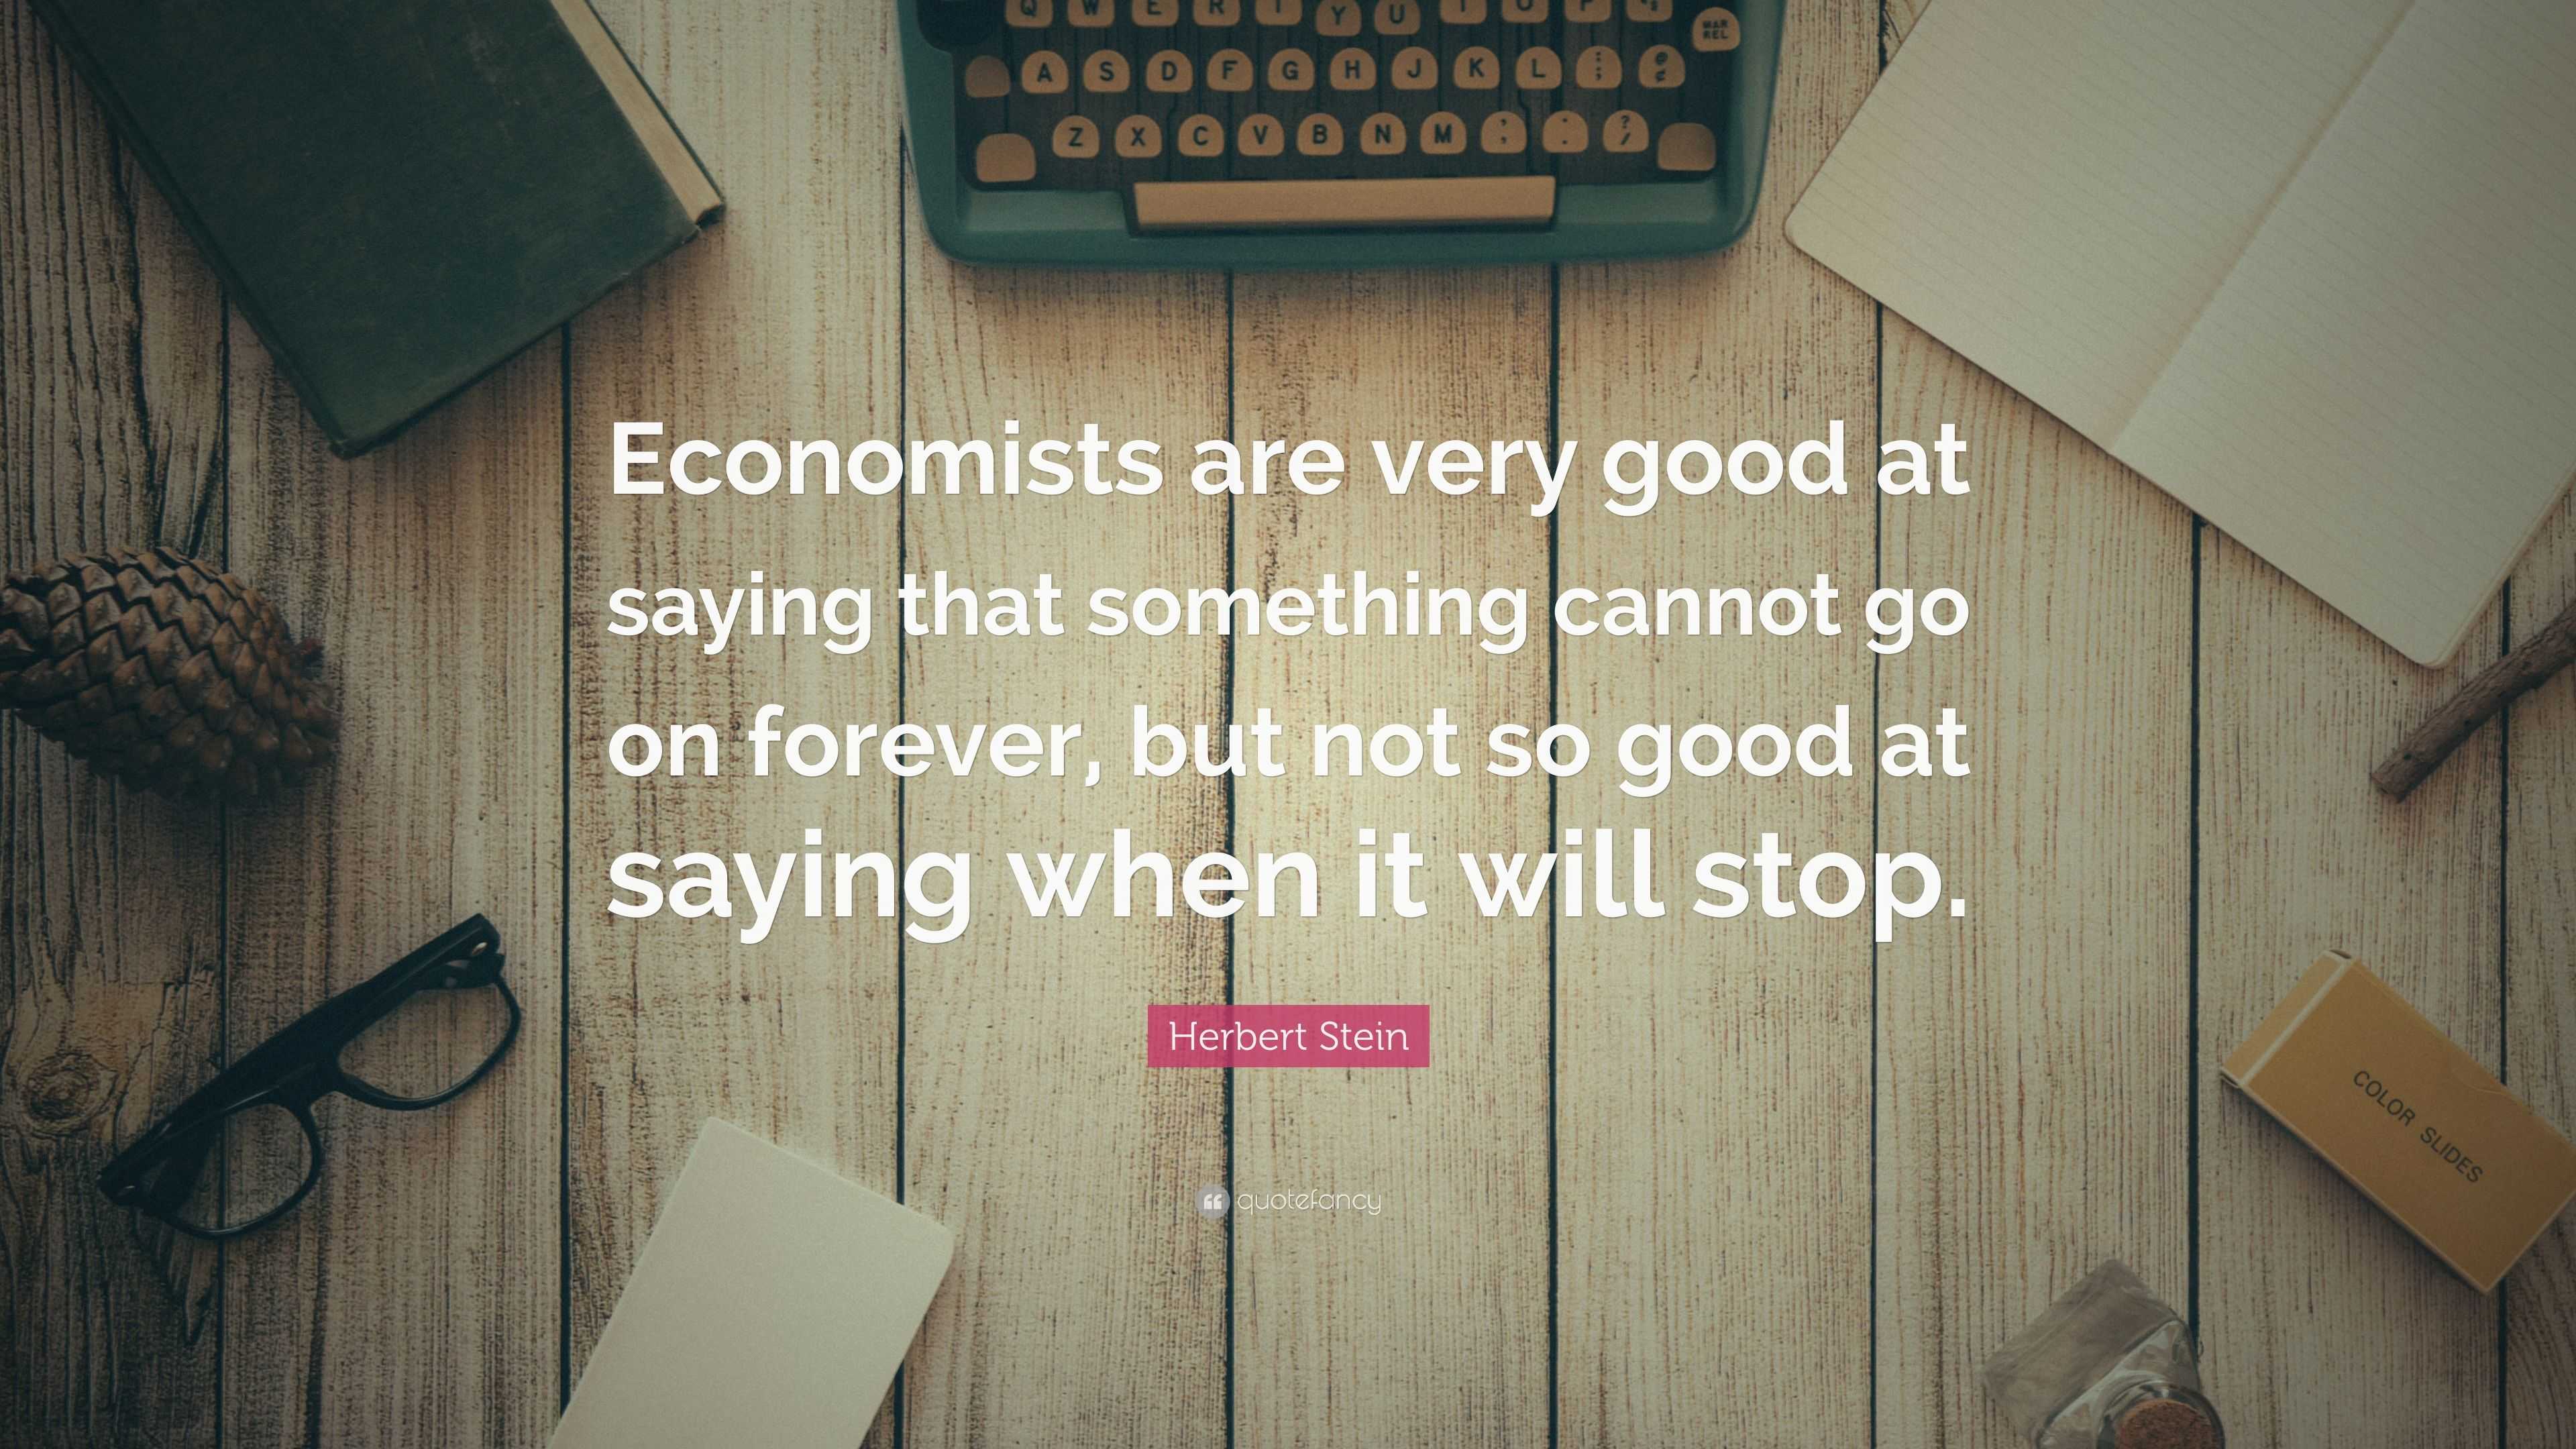 Herbert Stein Quote “Economists are very good at saying that something